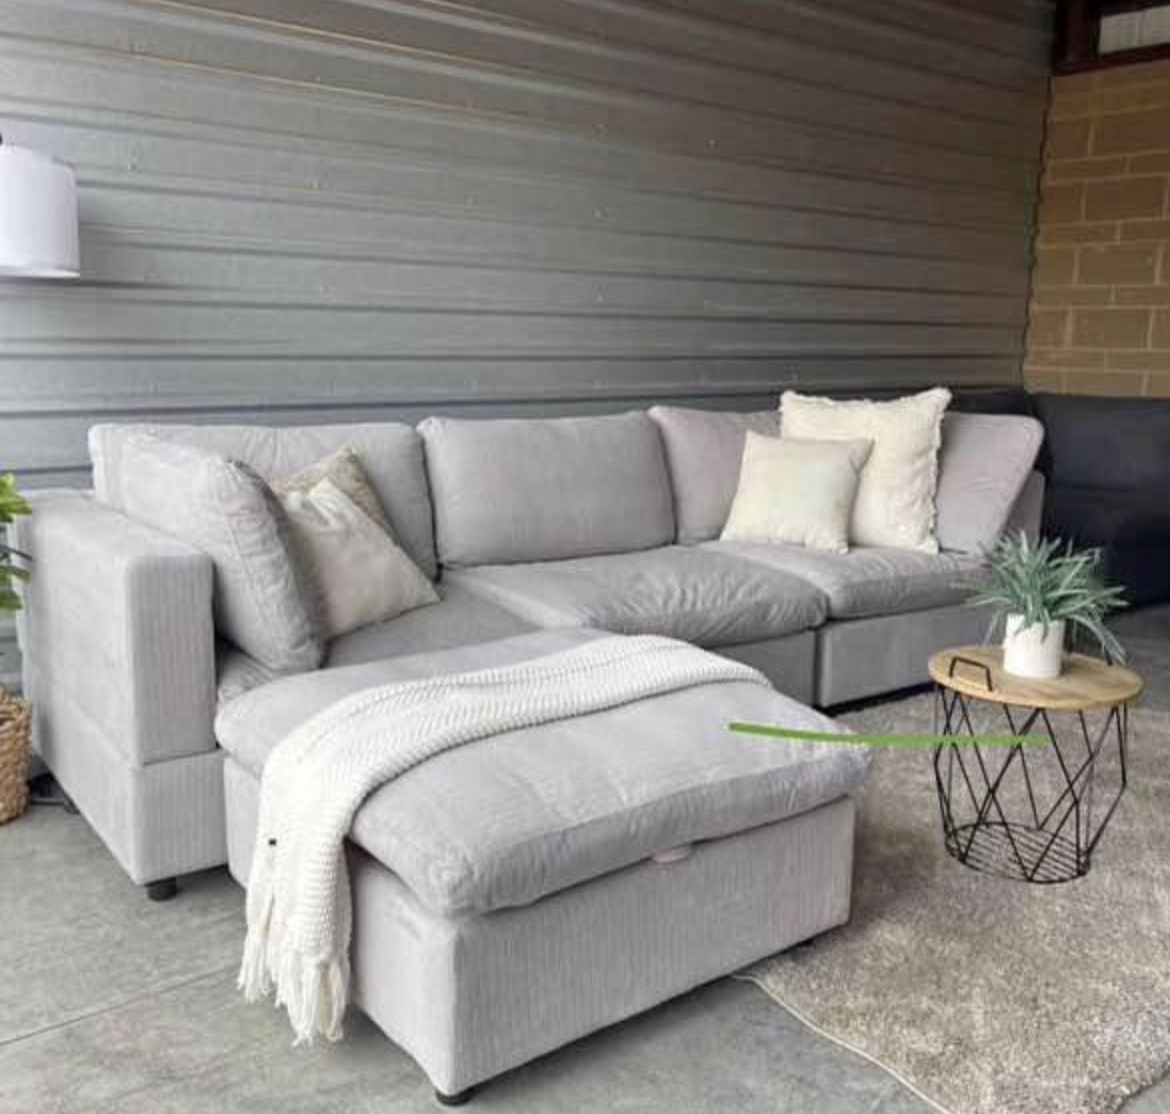 Light Gray Cloud Sectional (Delivery Available)